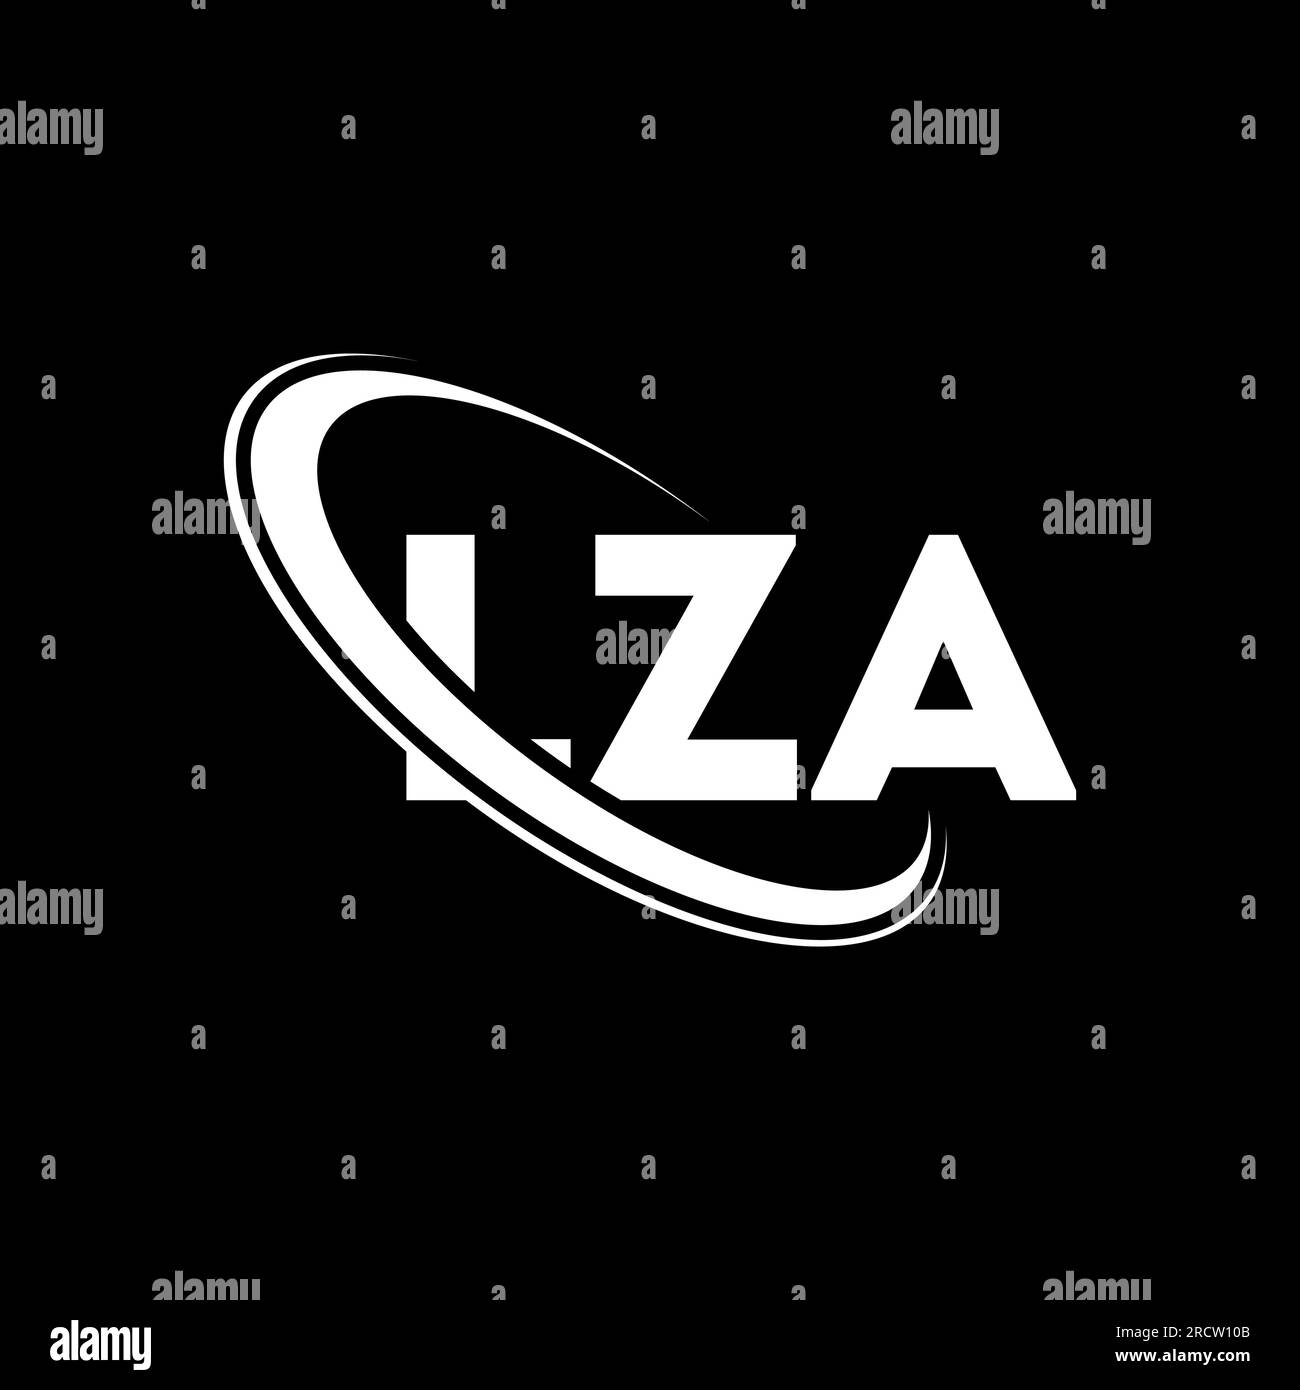 LZA logo. LZA letter. LZA letter logo design. Initials LZA logo linked with circle and uppercase monogram logo. LZA typography for technology, busines Stock Vector